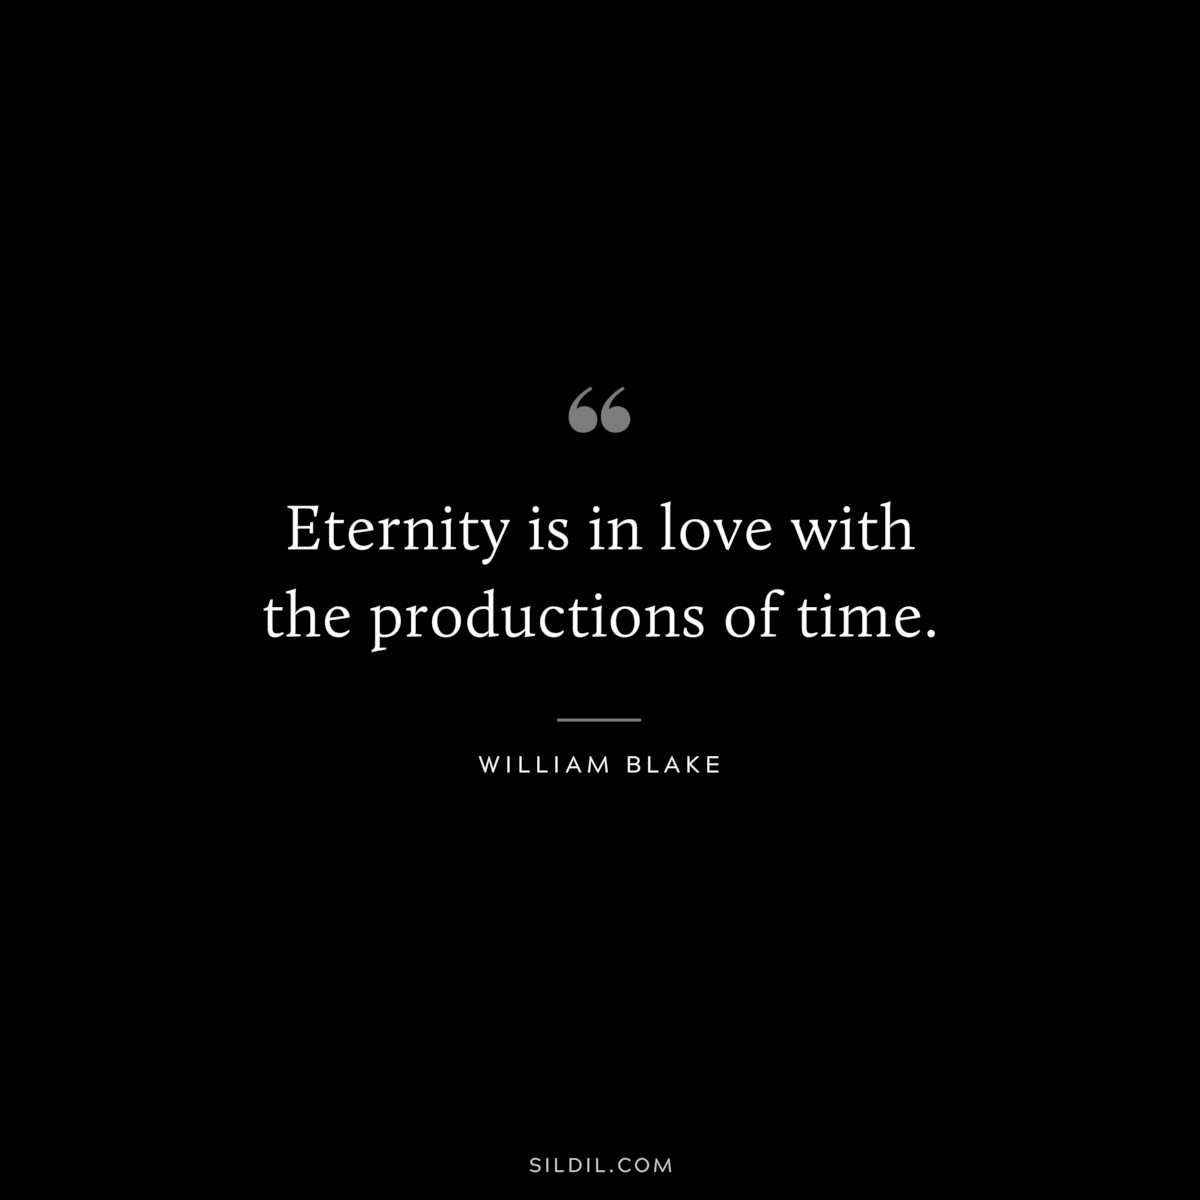 Eternity is in love with the productions of time. ― William Blake